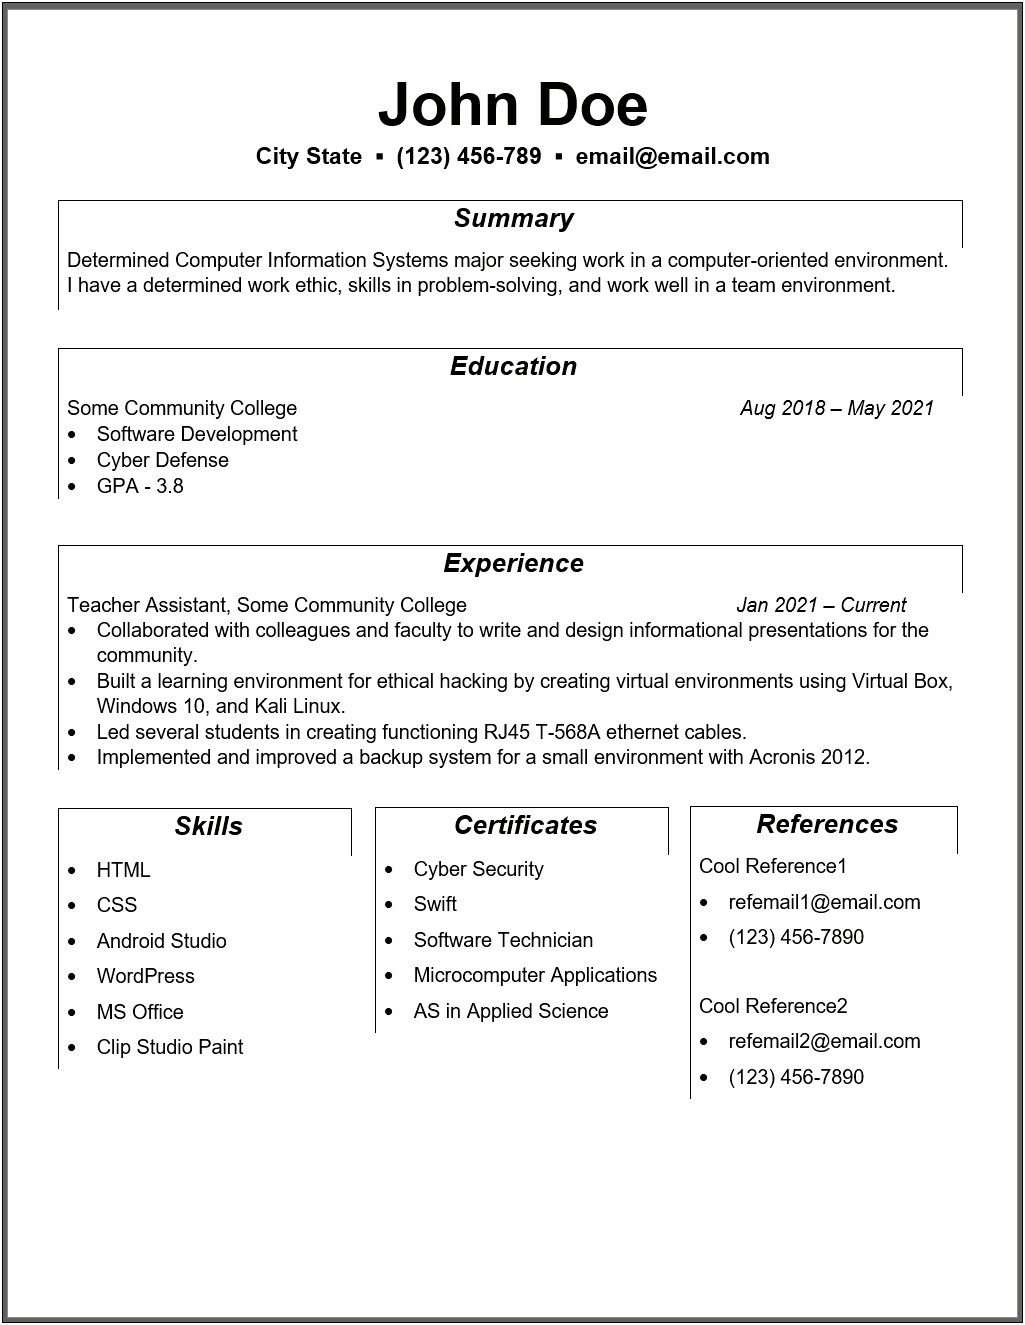 Where To Make A Resume For Free Reddit